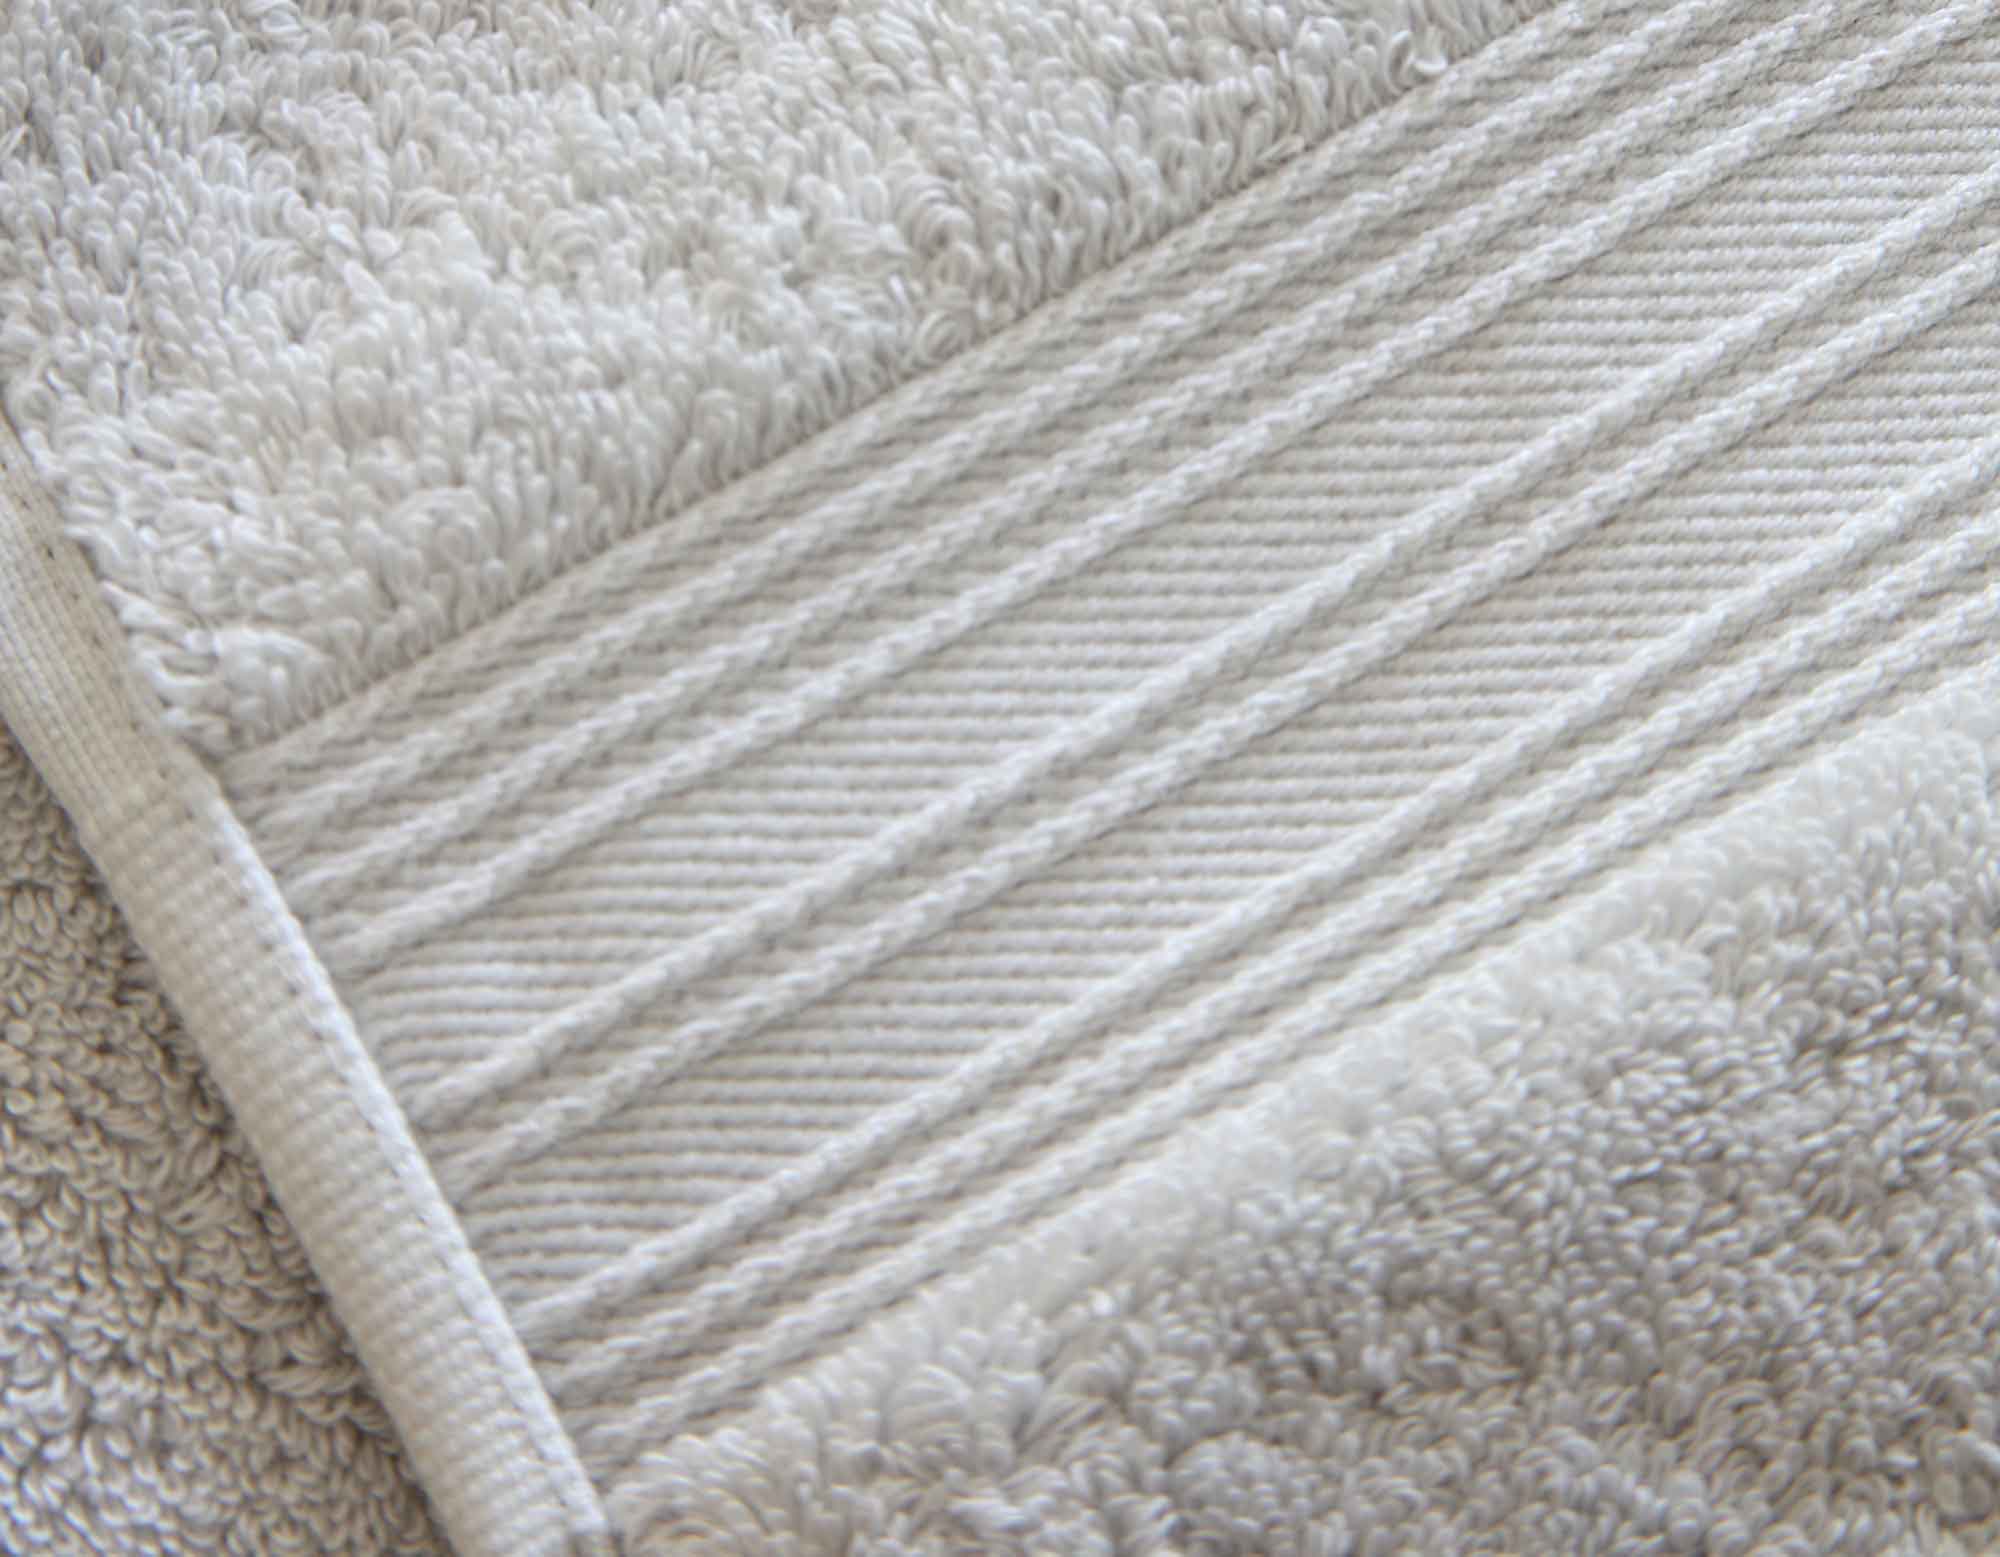 Pearl grey cotton bath sheet bundle close-up showing details of the stitching and cotton loops